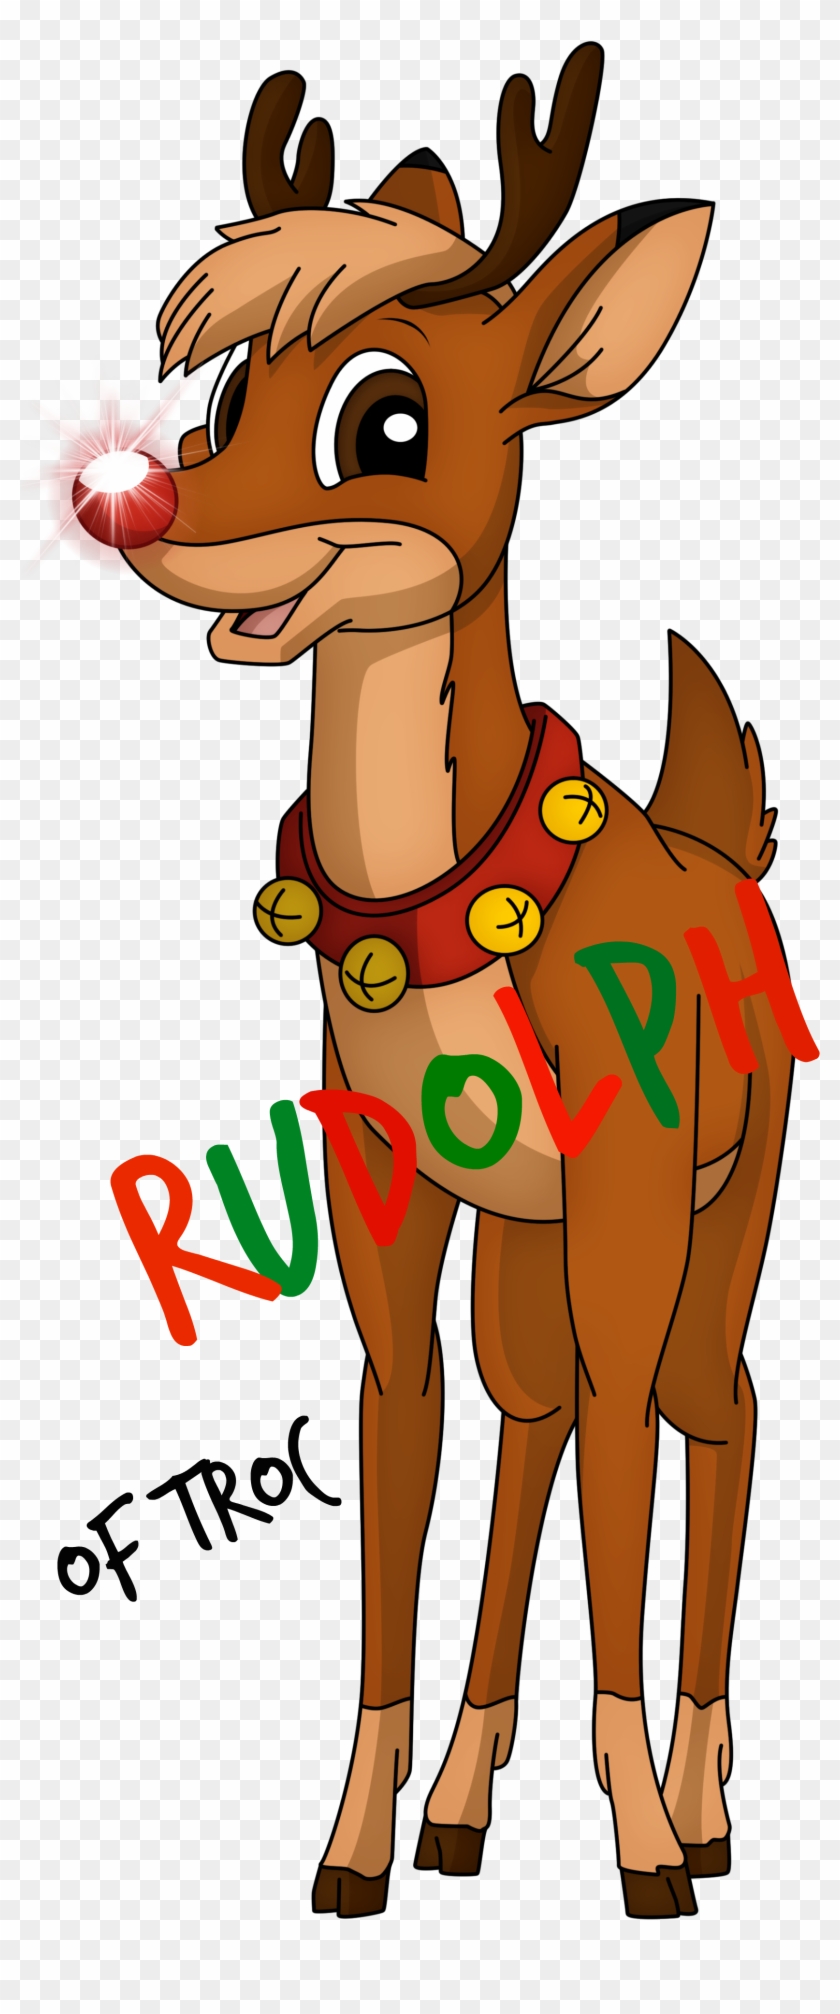 Clip Stock Image Rudolph The Red Nosed By Xxsteefylovexx - Rudolph The Red Nosed Reindeer Png Transparent Png #342742